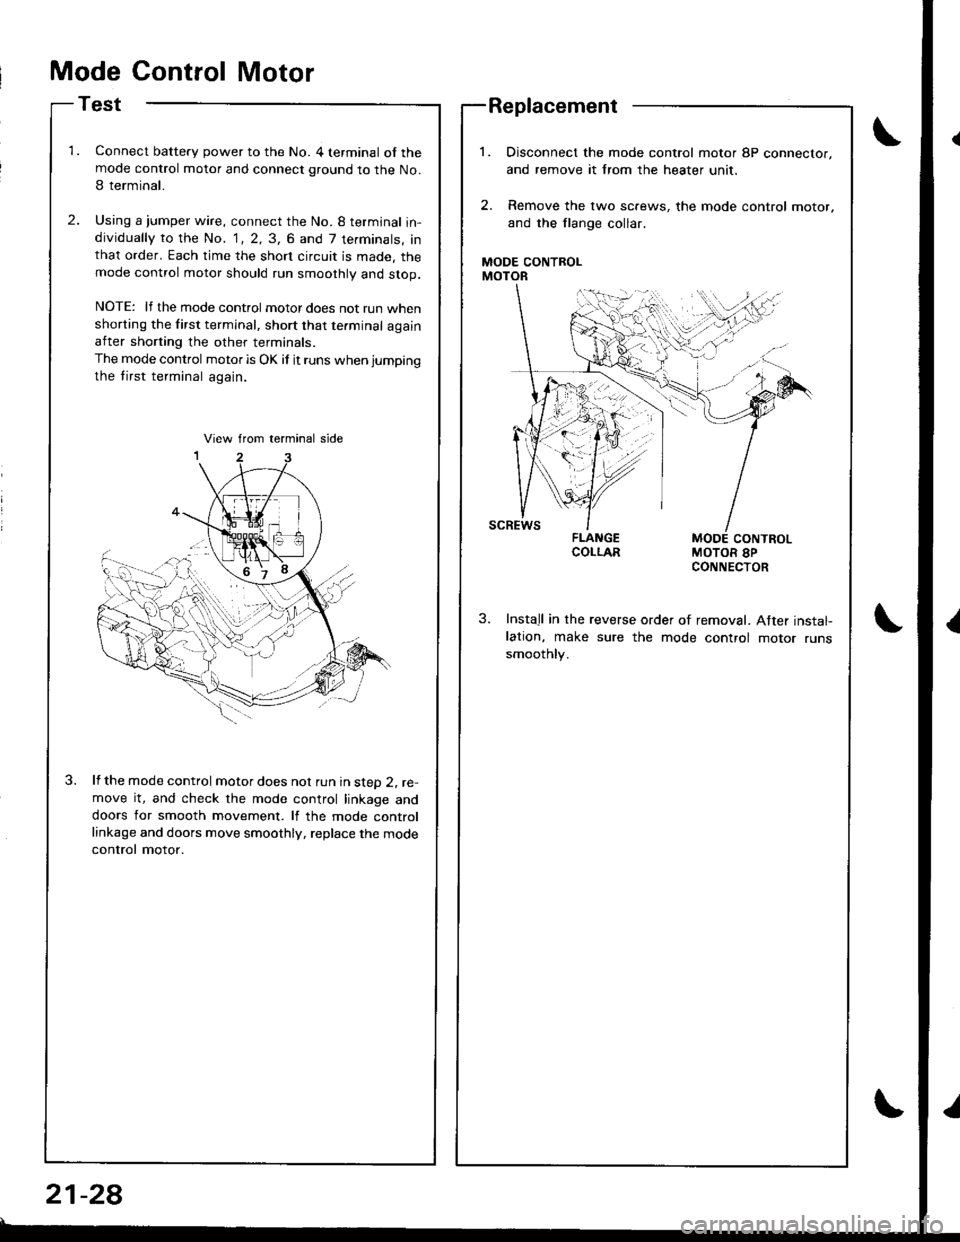 HONDA INTEGRA 1998 4.G Workshop Manual Mode Control Motor
Test
Connect battery power to the No. 4 terminal of themode control motor and connect ground to the No.
I terminal.
Using a jumper wire, connect the No. 8 termjnal in-dividually to 